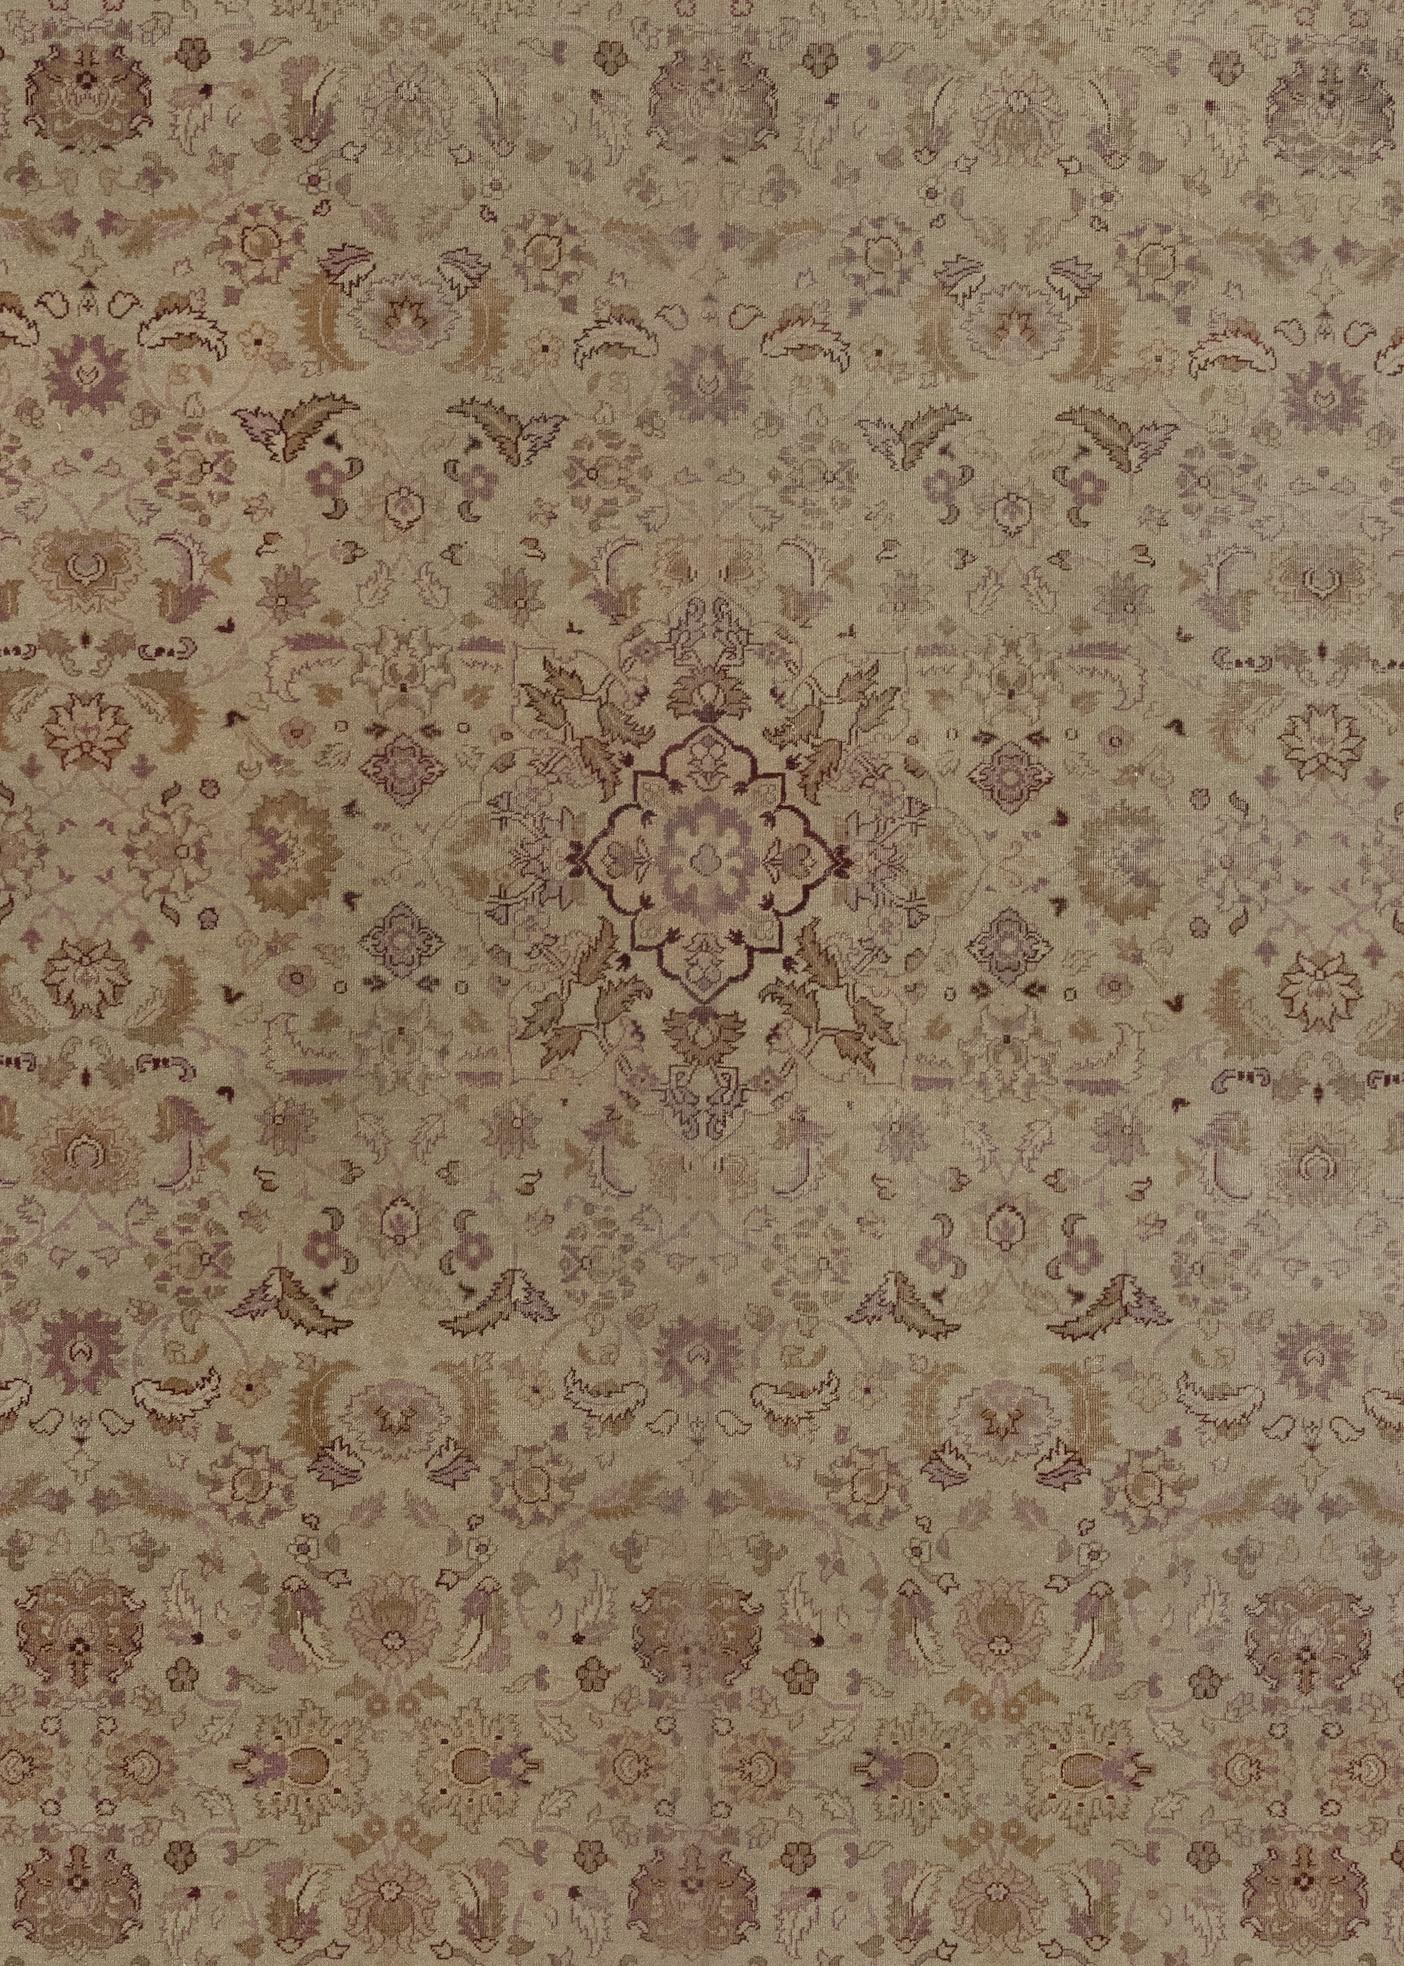 This is a beautiful rug featuring delicate floral patterns and a soft color palette of beige, brown, pinks, and crimson.